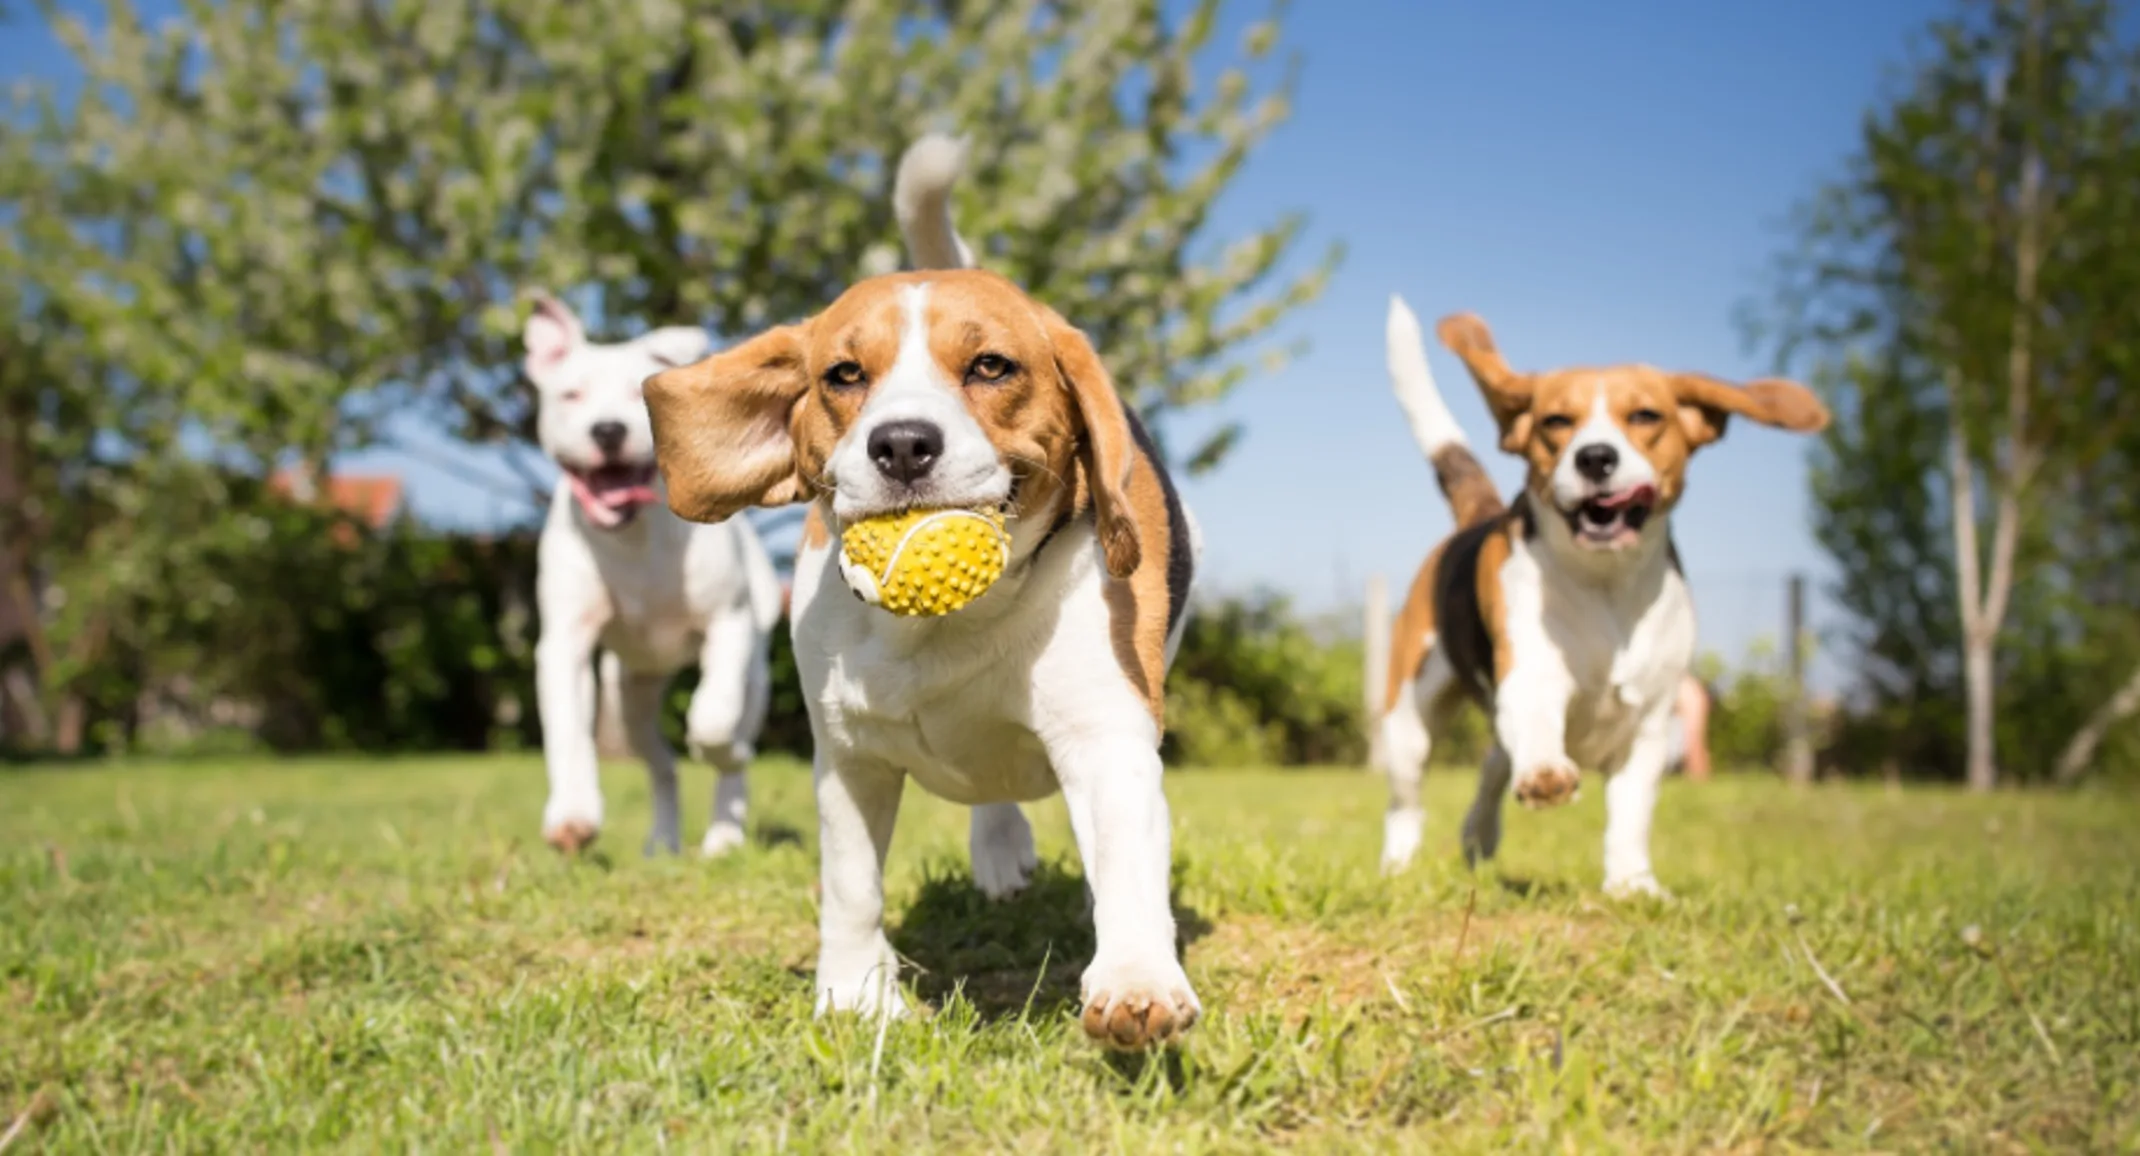 Dogs playing outdoors on grass with a ball